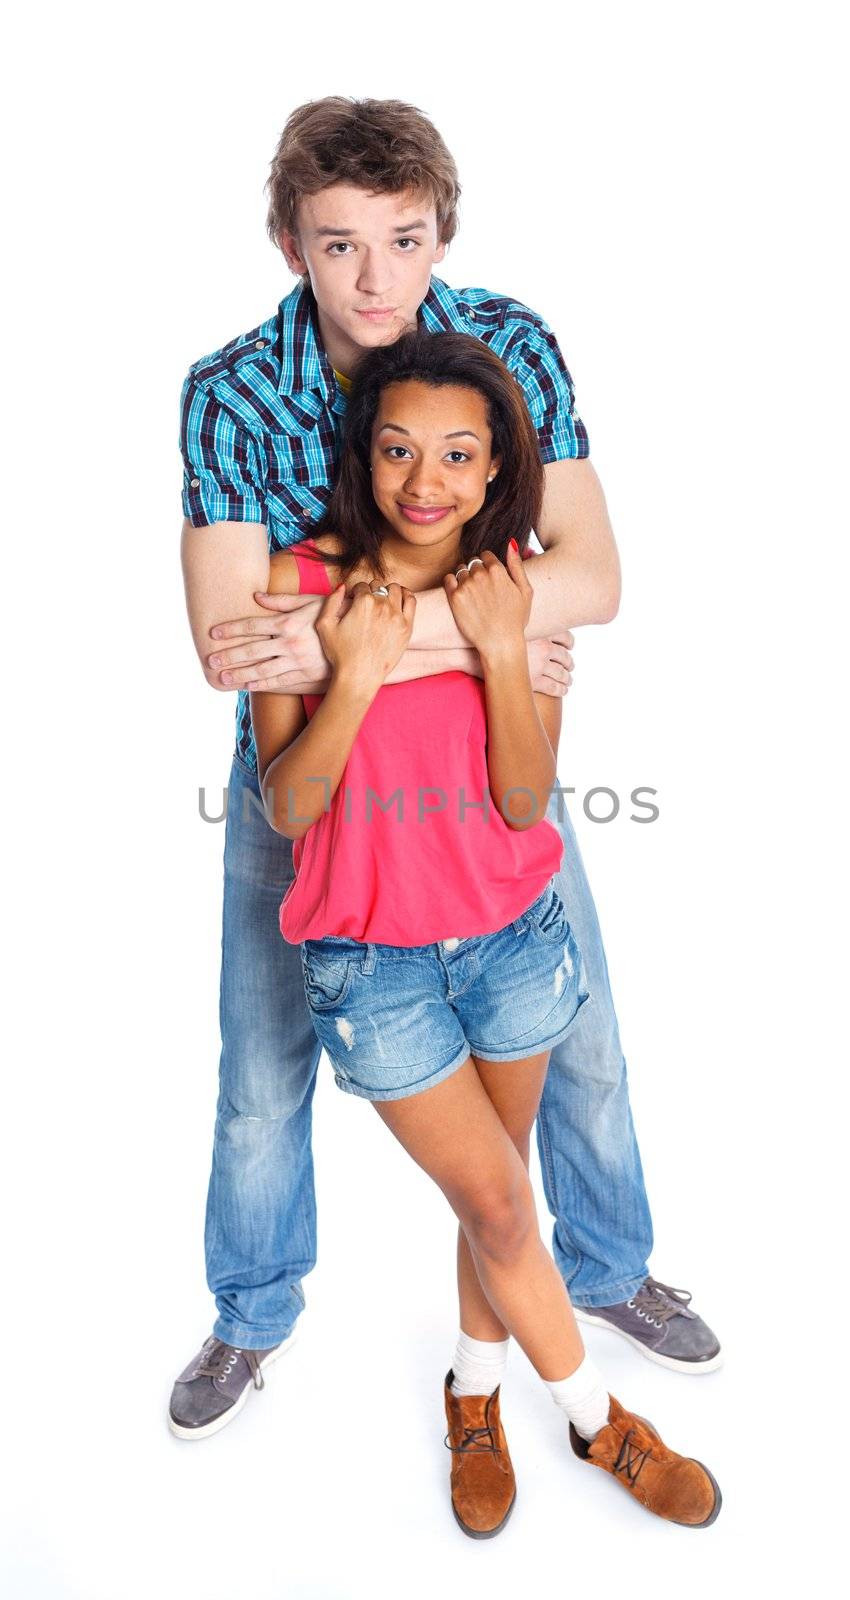 Smiling young man with pretty girlfriend. Isolated on white background.